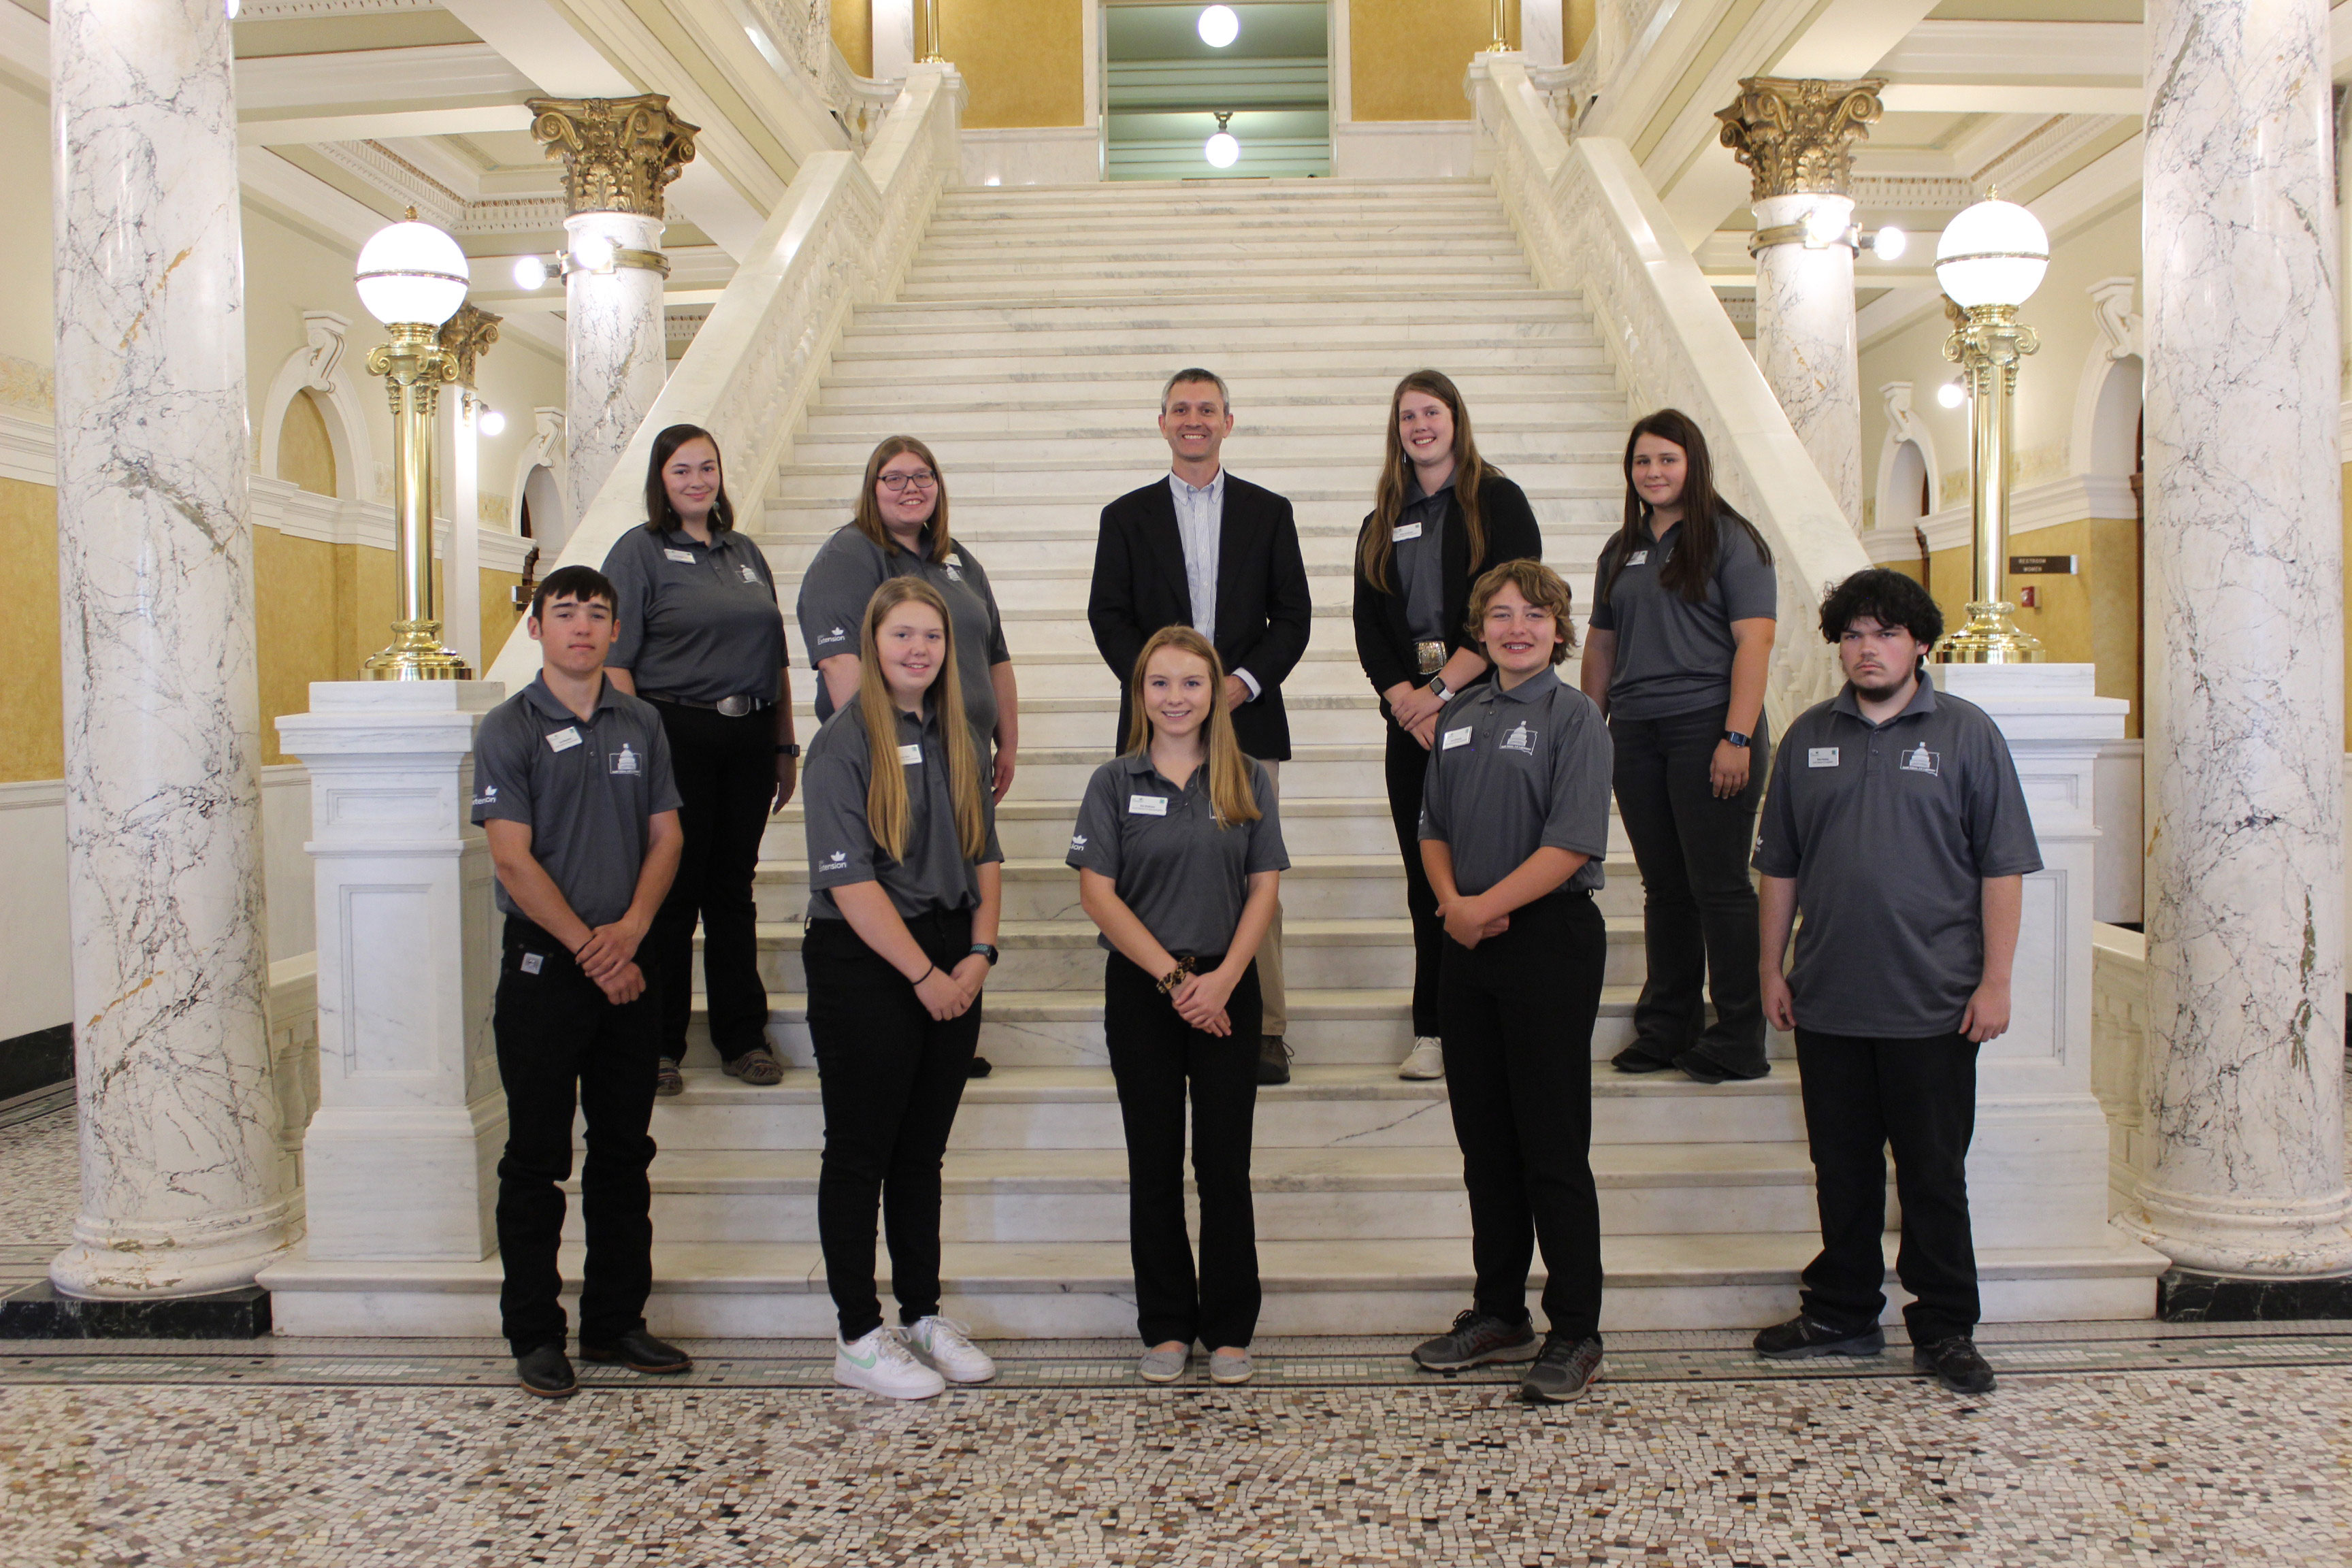 South Dakota 4-H Program Director Tim Tanner with a group of 4-H youth on the grand staircase inside the South Dakota State Capitol.